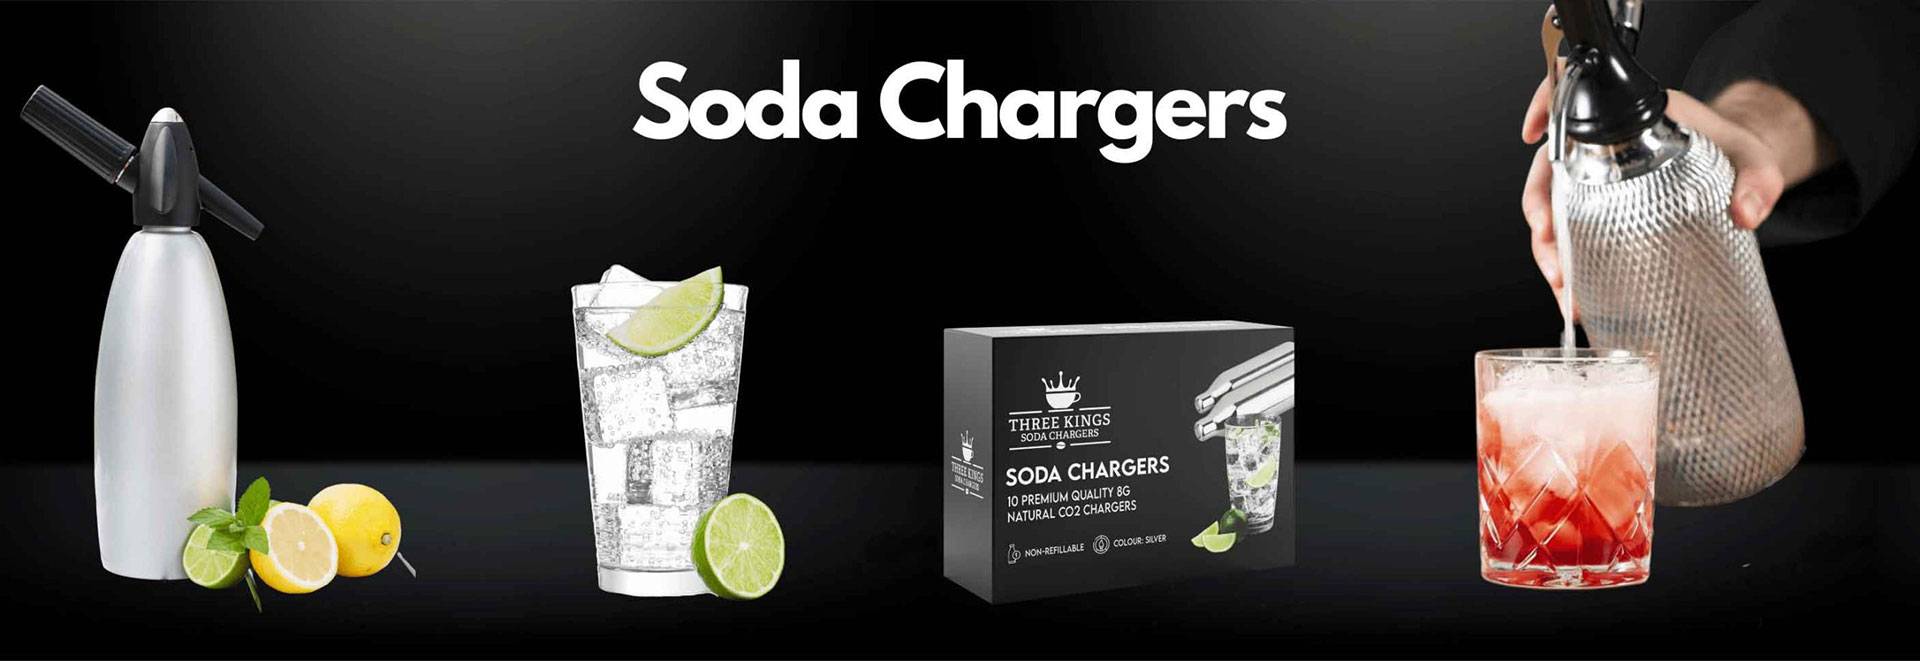 soda chargers